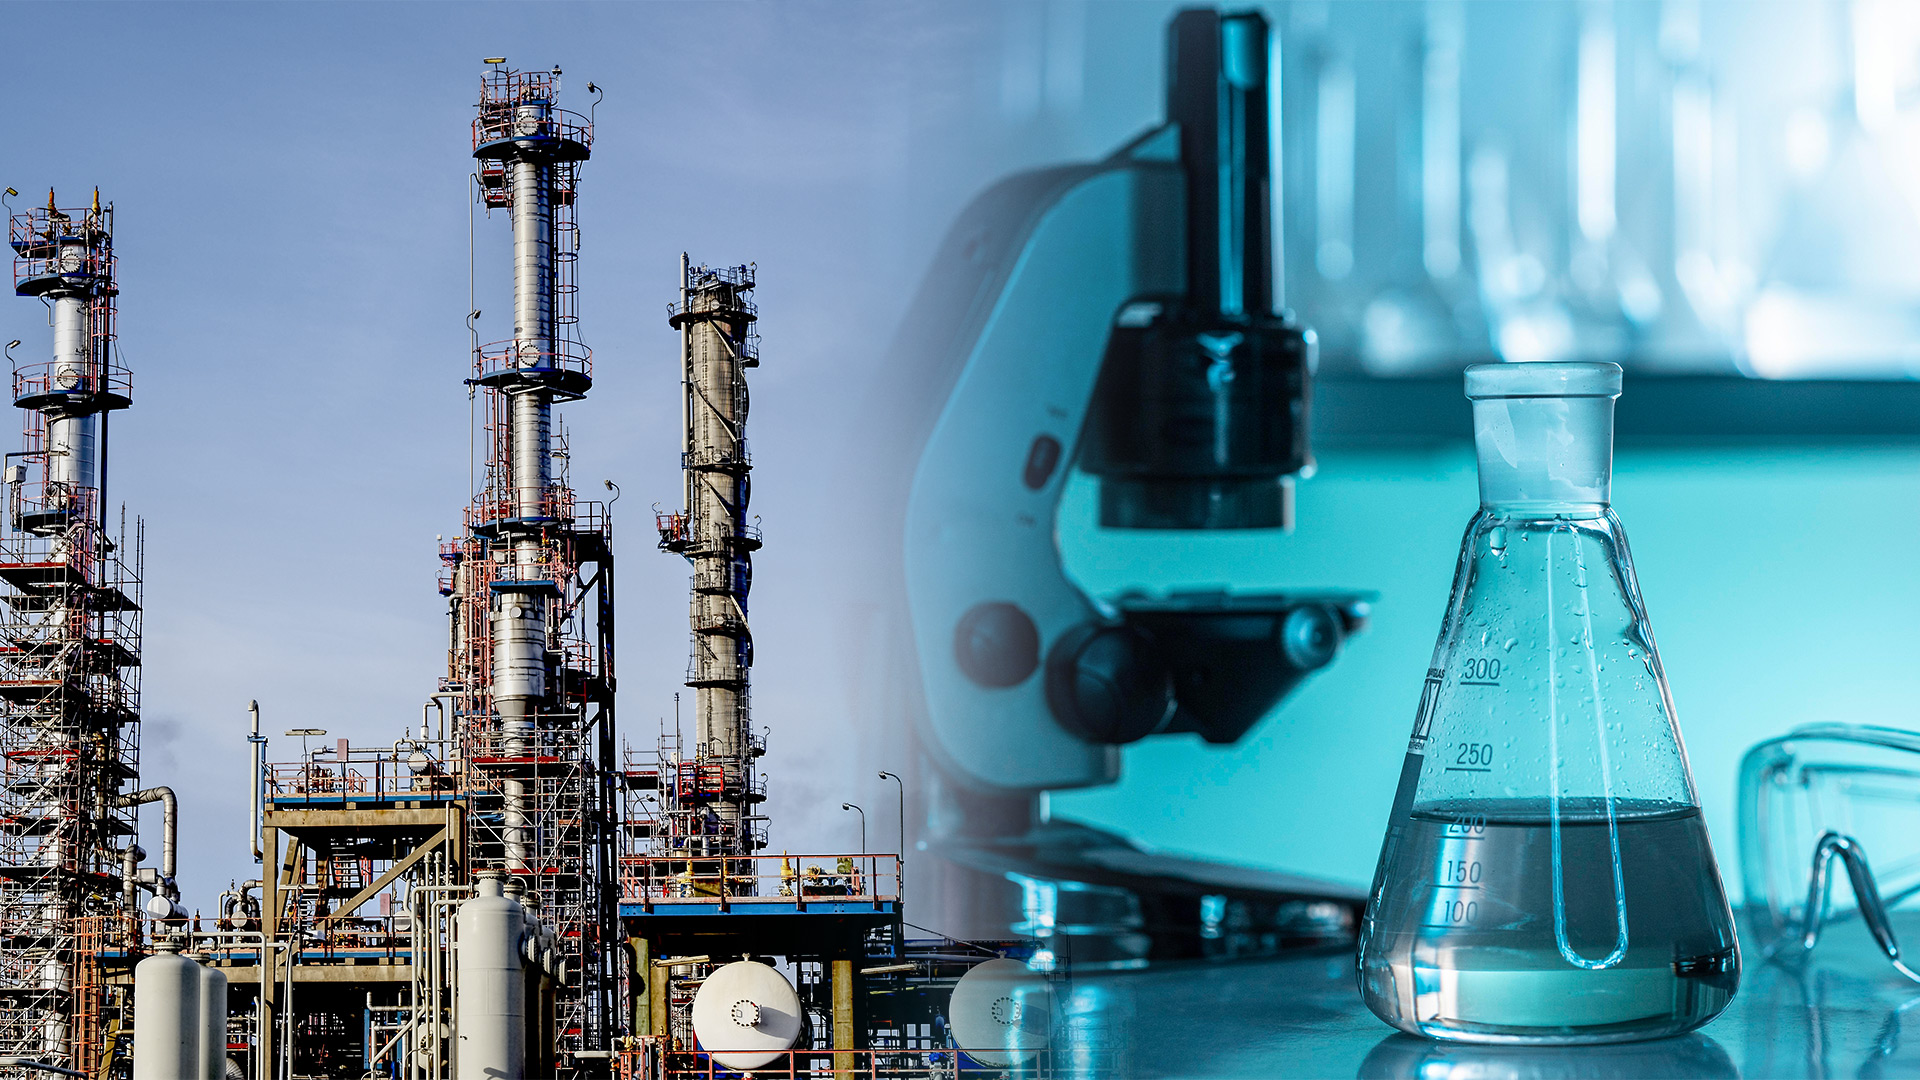 Market Forecast: Anticipating Future Trends in Chemical and Material Markets